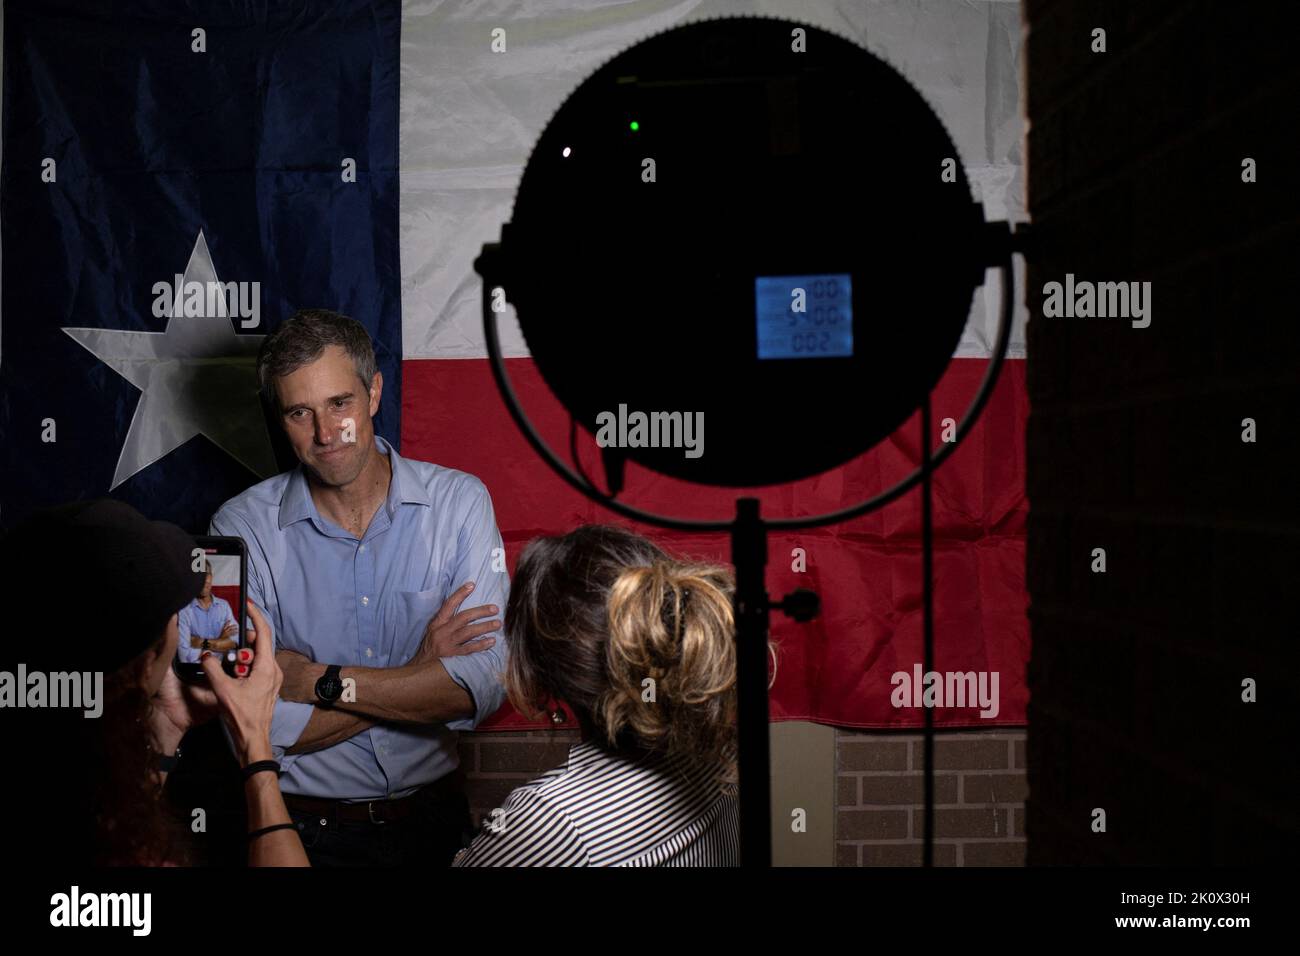 Texas Democratic gubernatorial candidate and former U.S. congressman Beto O'Rourke stands in front of the Texas state flag while posing for photographs during a campaign event in Houston, Texas, U.S. September 13, 2022. REUTERS/Adrees Latif Stock Photo